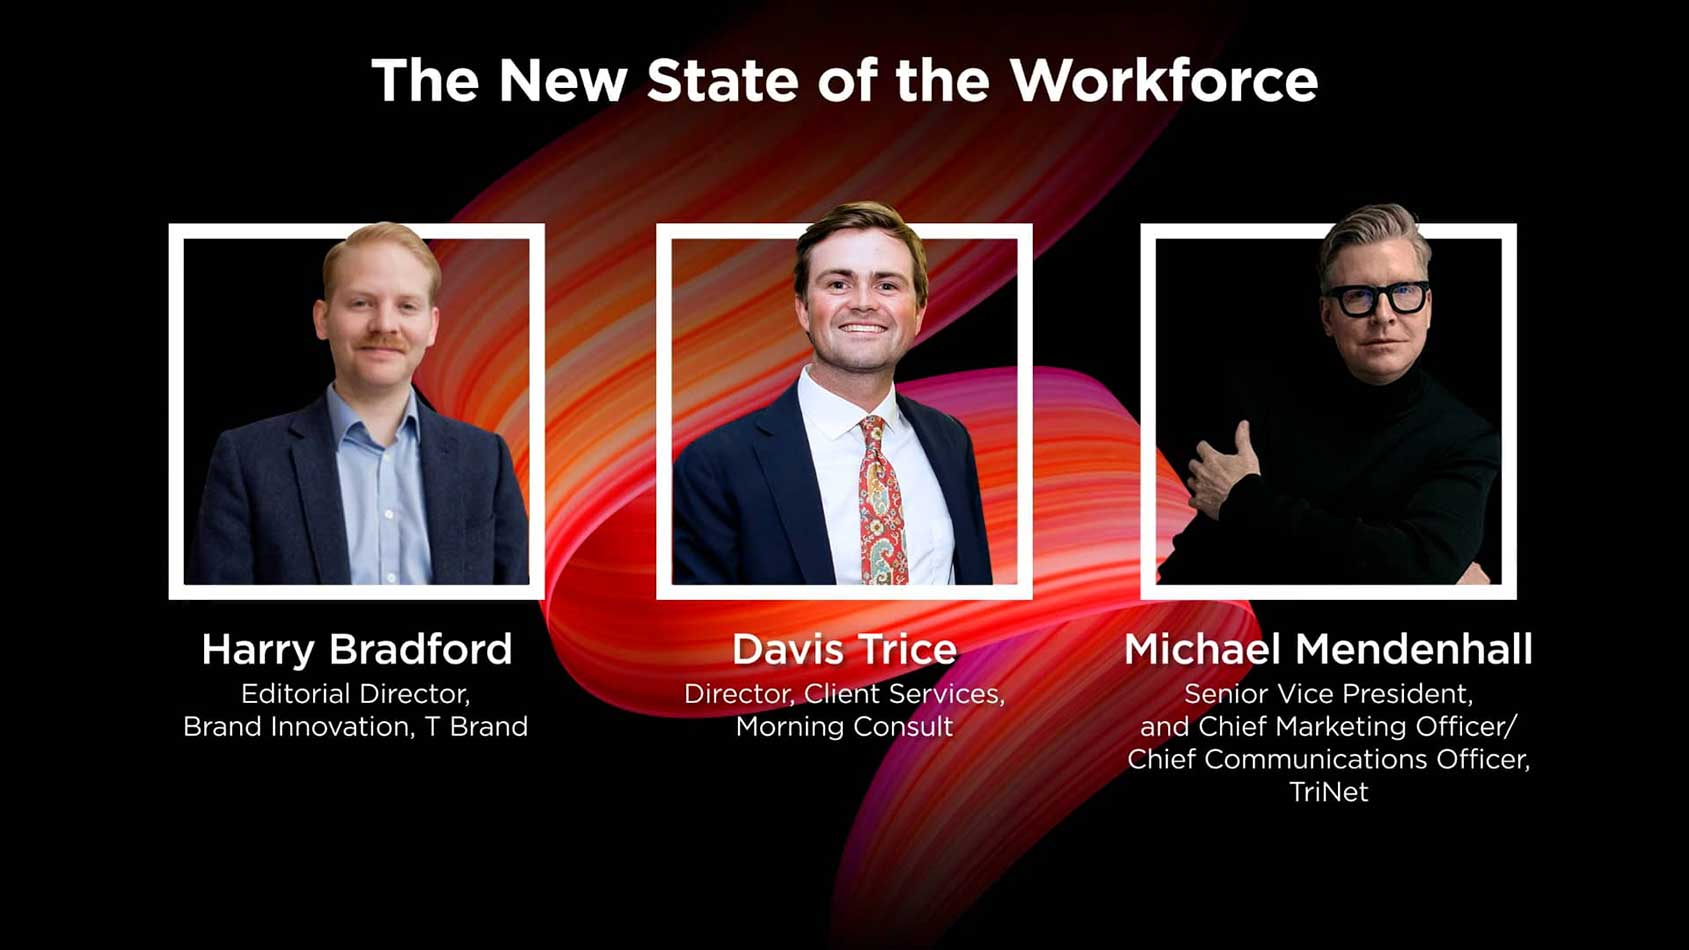 The New State of the Workforce